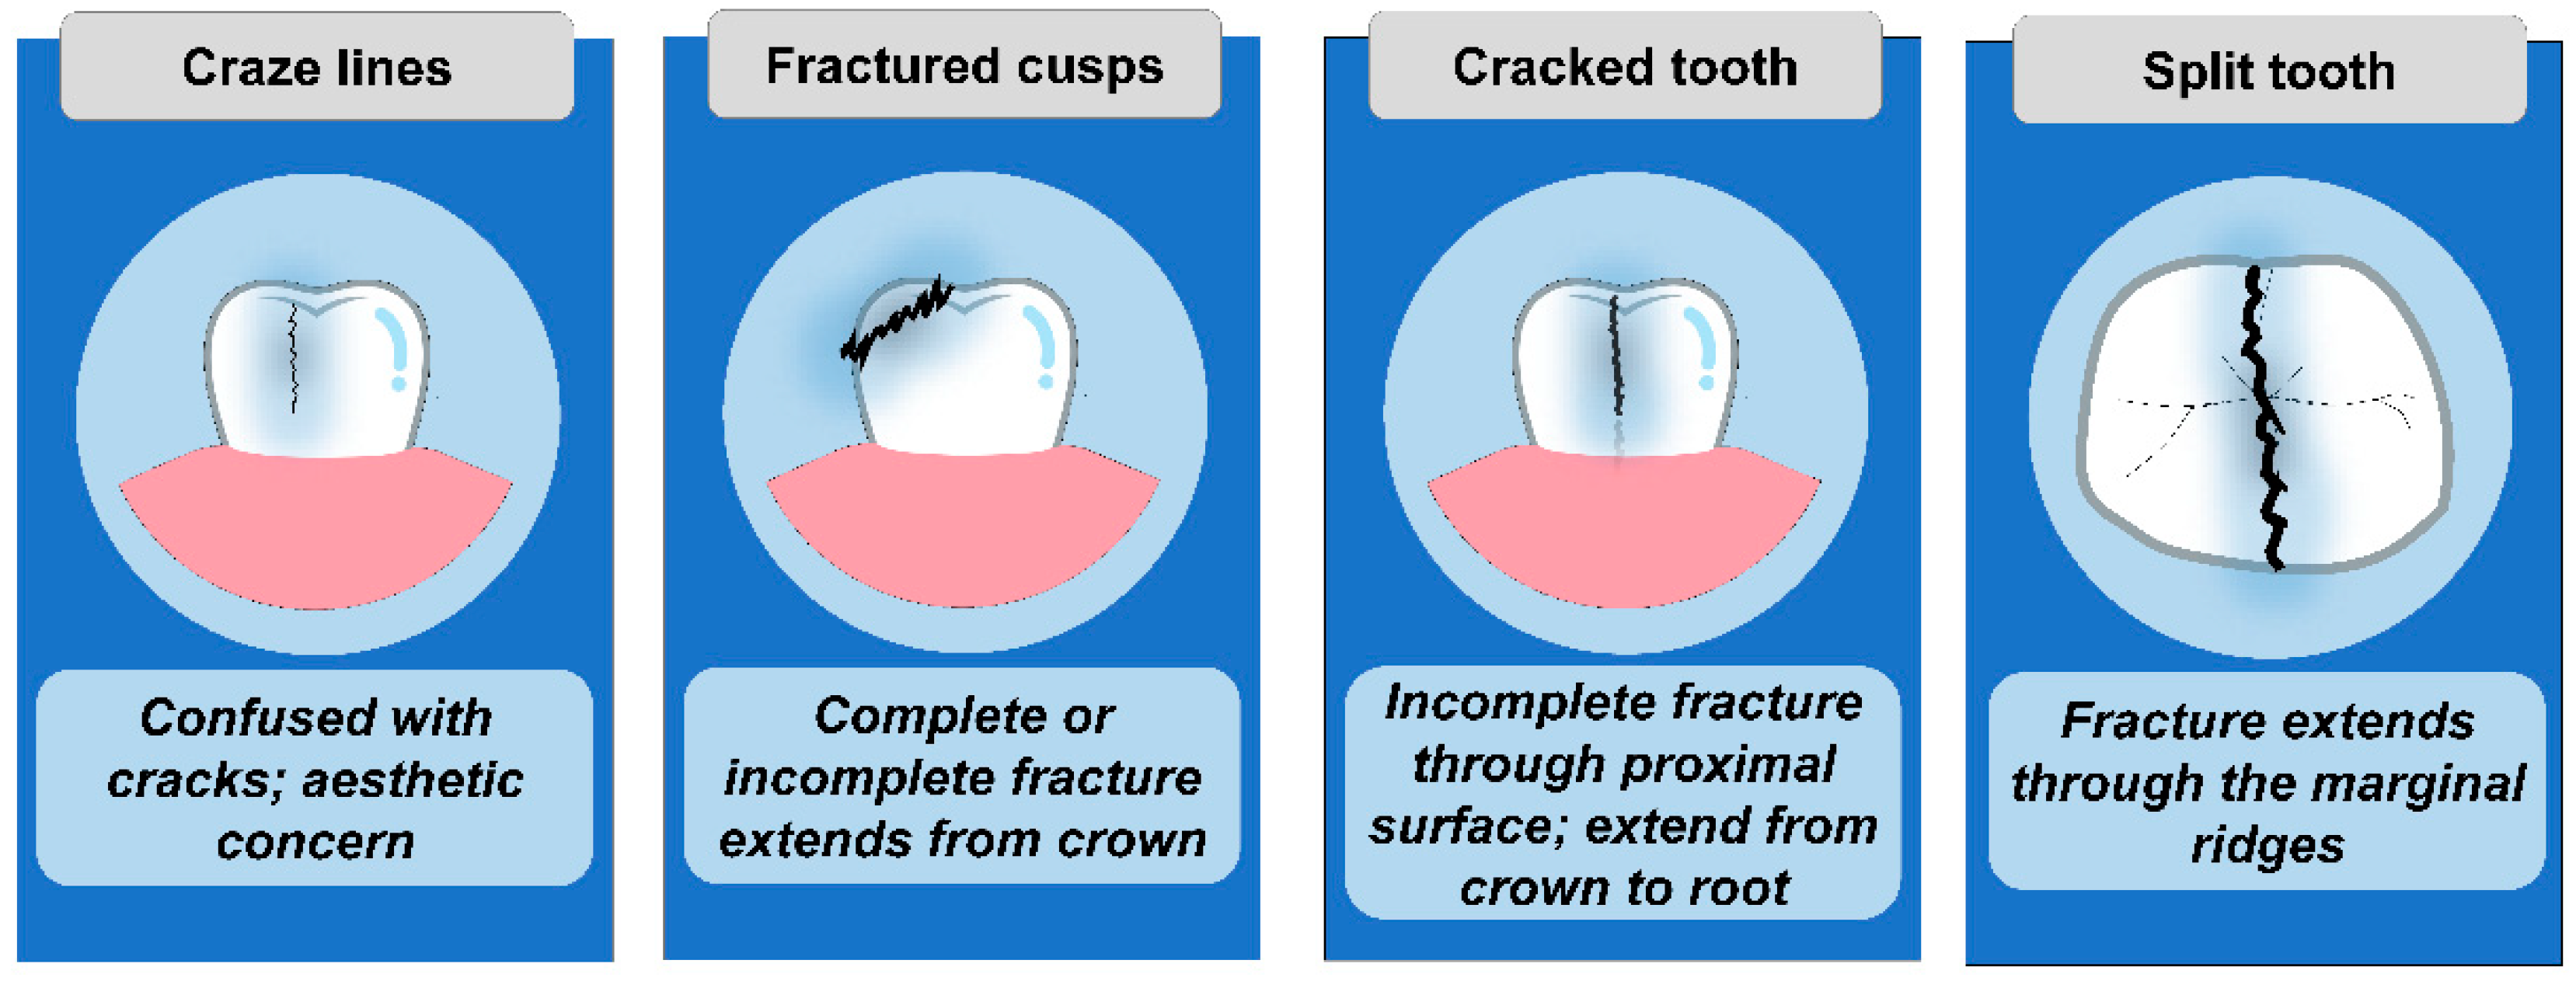 What If I Notice Cracks in My Teeth?